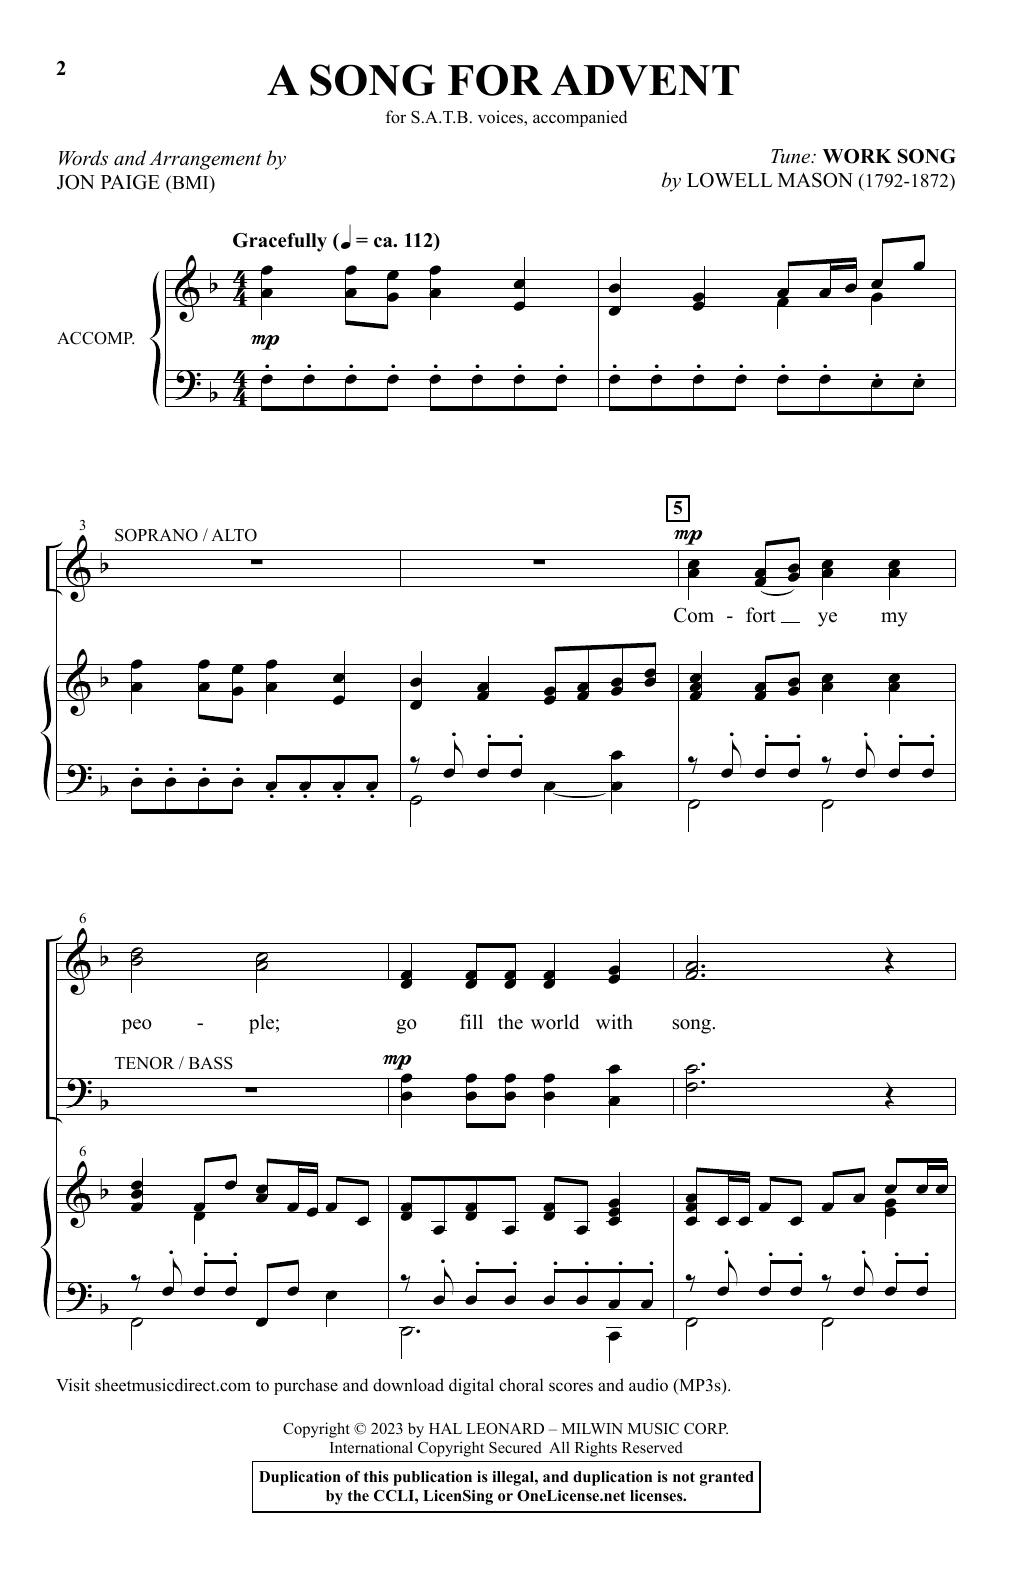 Download Jon Paige A Song For Advent Sheet Music